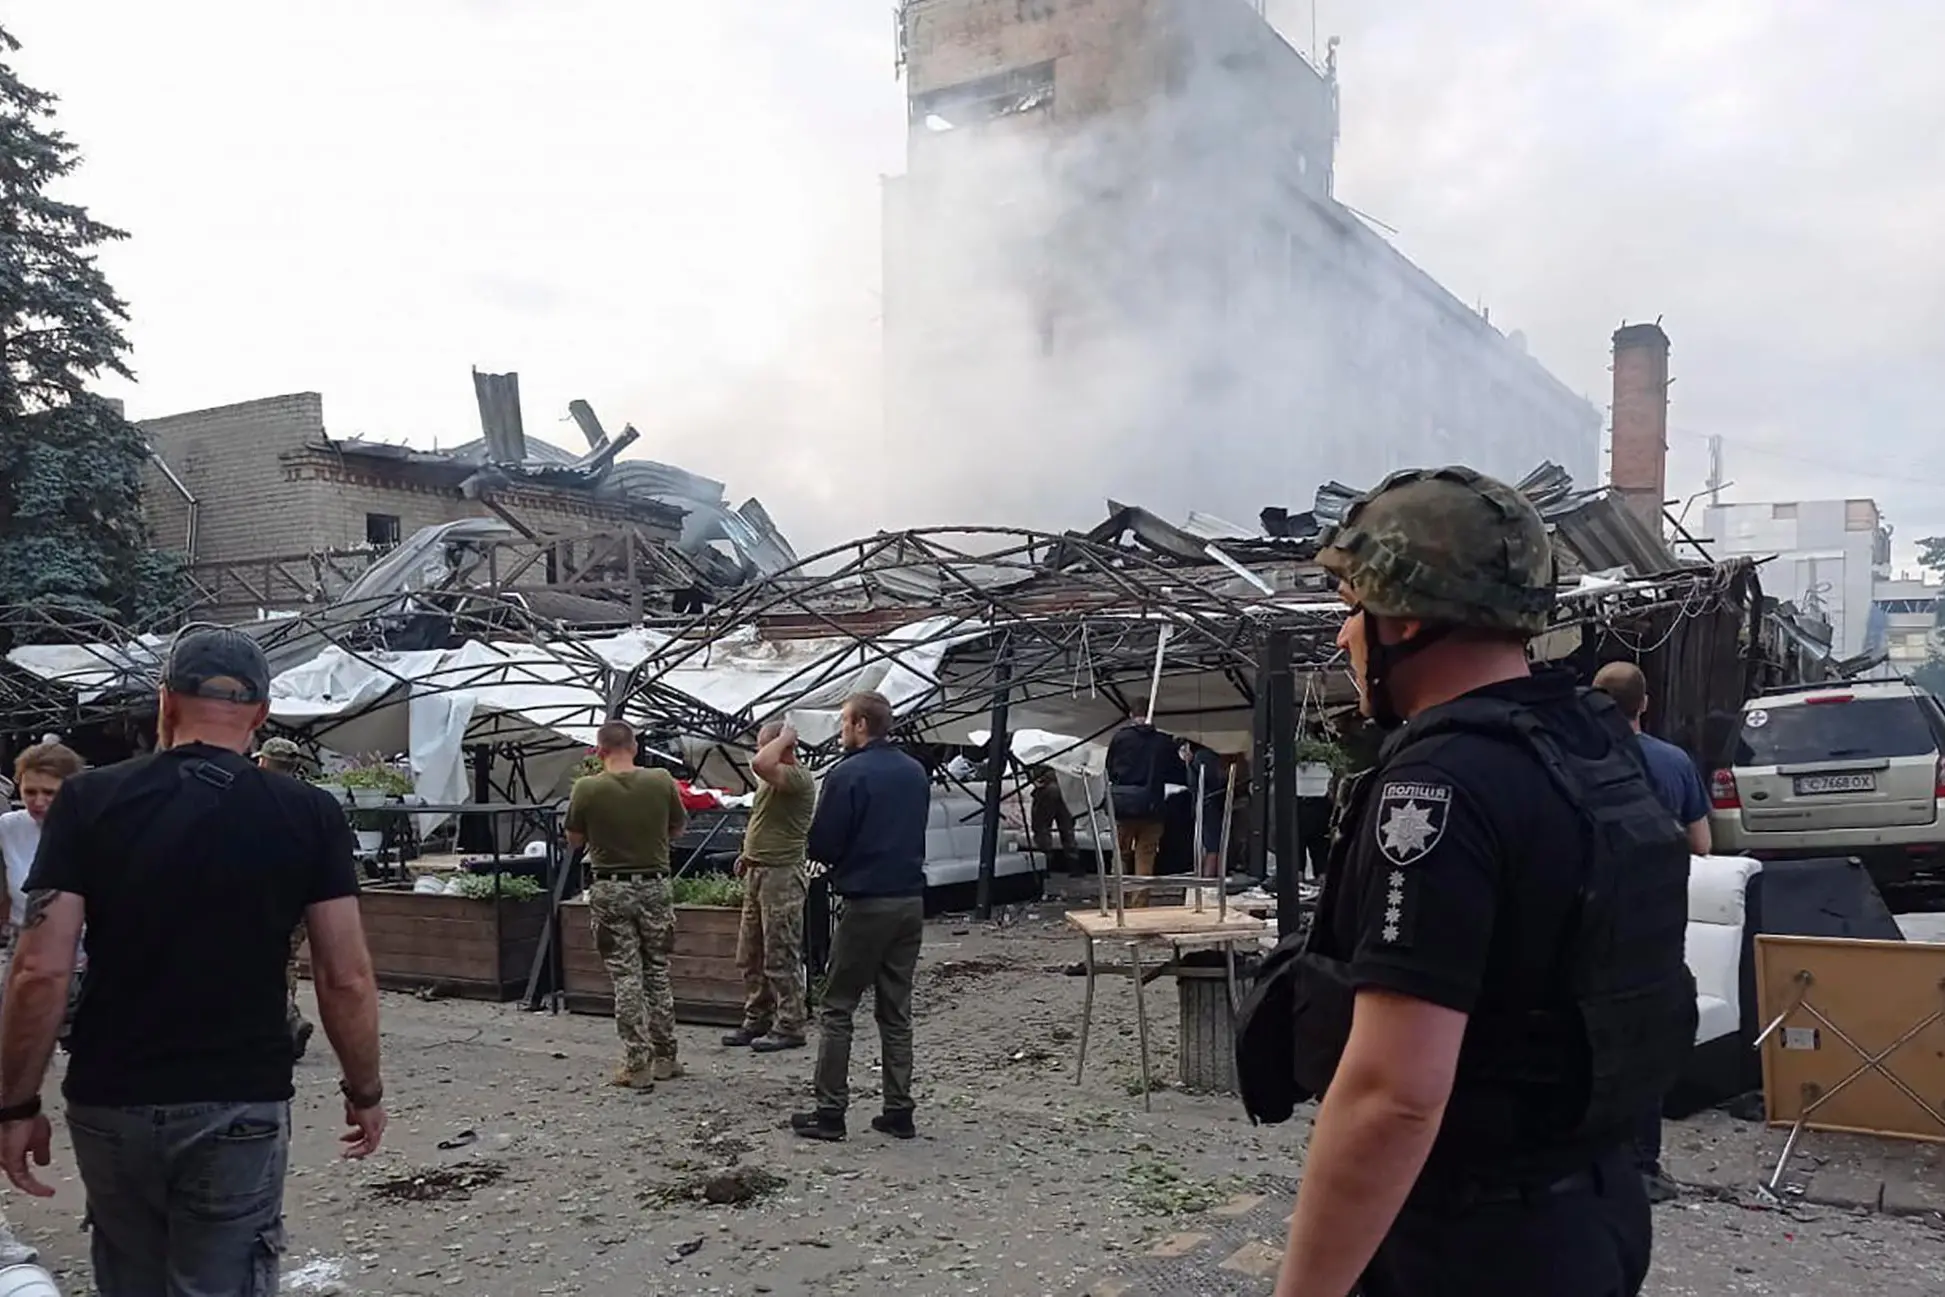 epa10714322 A handout picture made available by the National Police press service shows Ukrainian rescuers and policemen work on the site of a rocket hit in downtown Kramatorsk, Donetsk area, Ukraine, 27 June 2023 amid the Russian invasion. According the National Police report, two S300 rockets hit Kramatorsk, at least two people died and 22 others were injured. Russian troops entered Ukrainian territory in February 2022, starting a conflict that has provoked destruction and a humanitarian crisis. EPA/National police of Ukraine / HANDOUT HANDOUT HANDOUT EDITORIAL USE ONLY/NO SALES